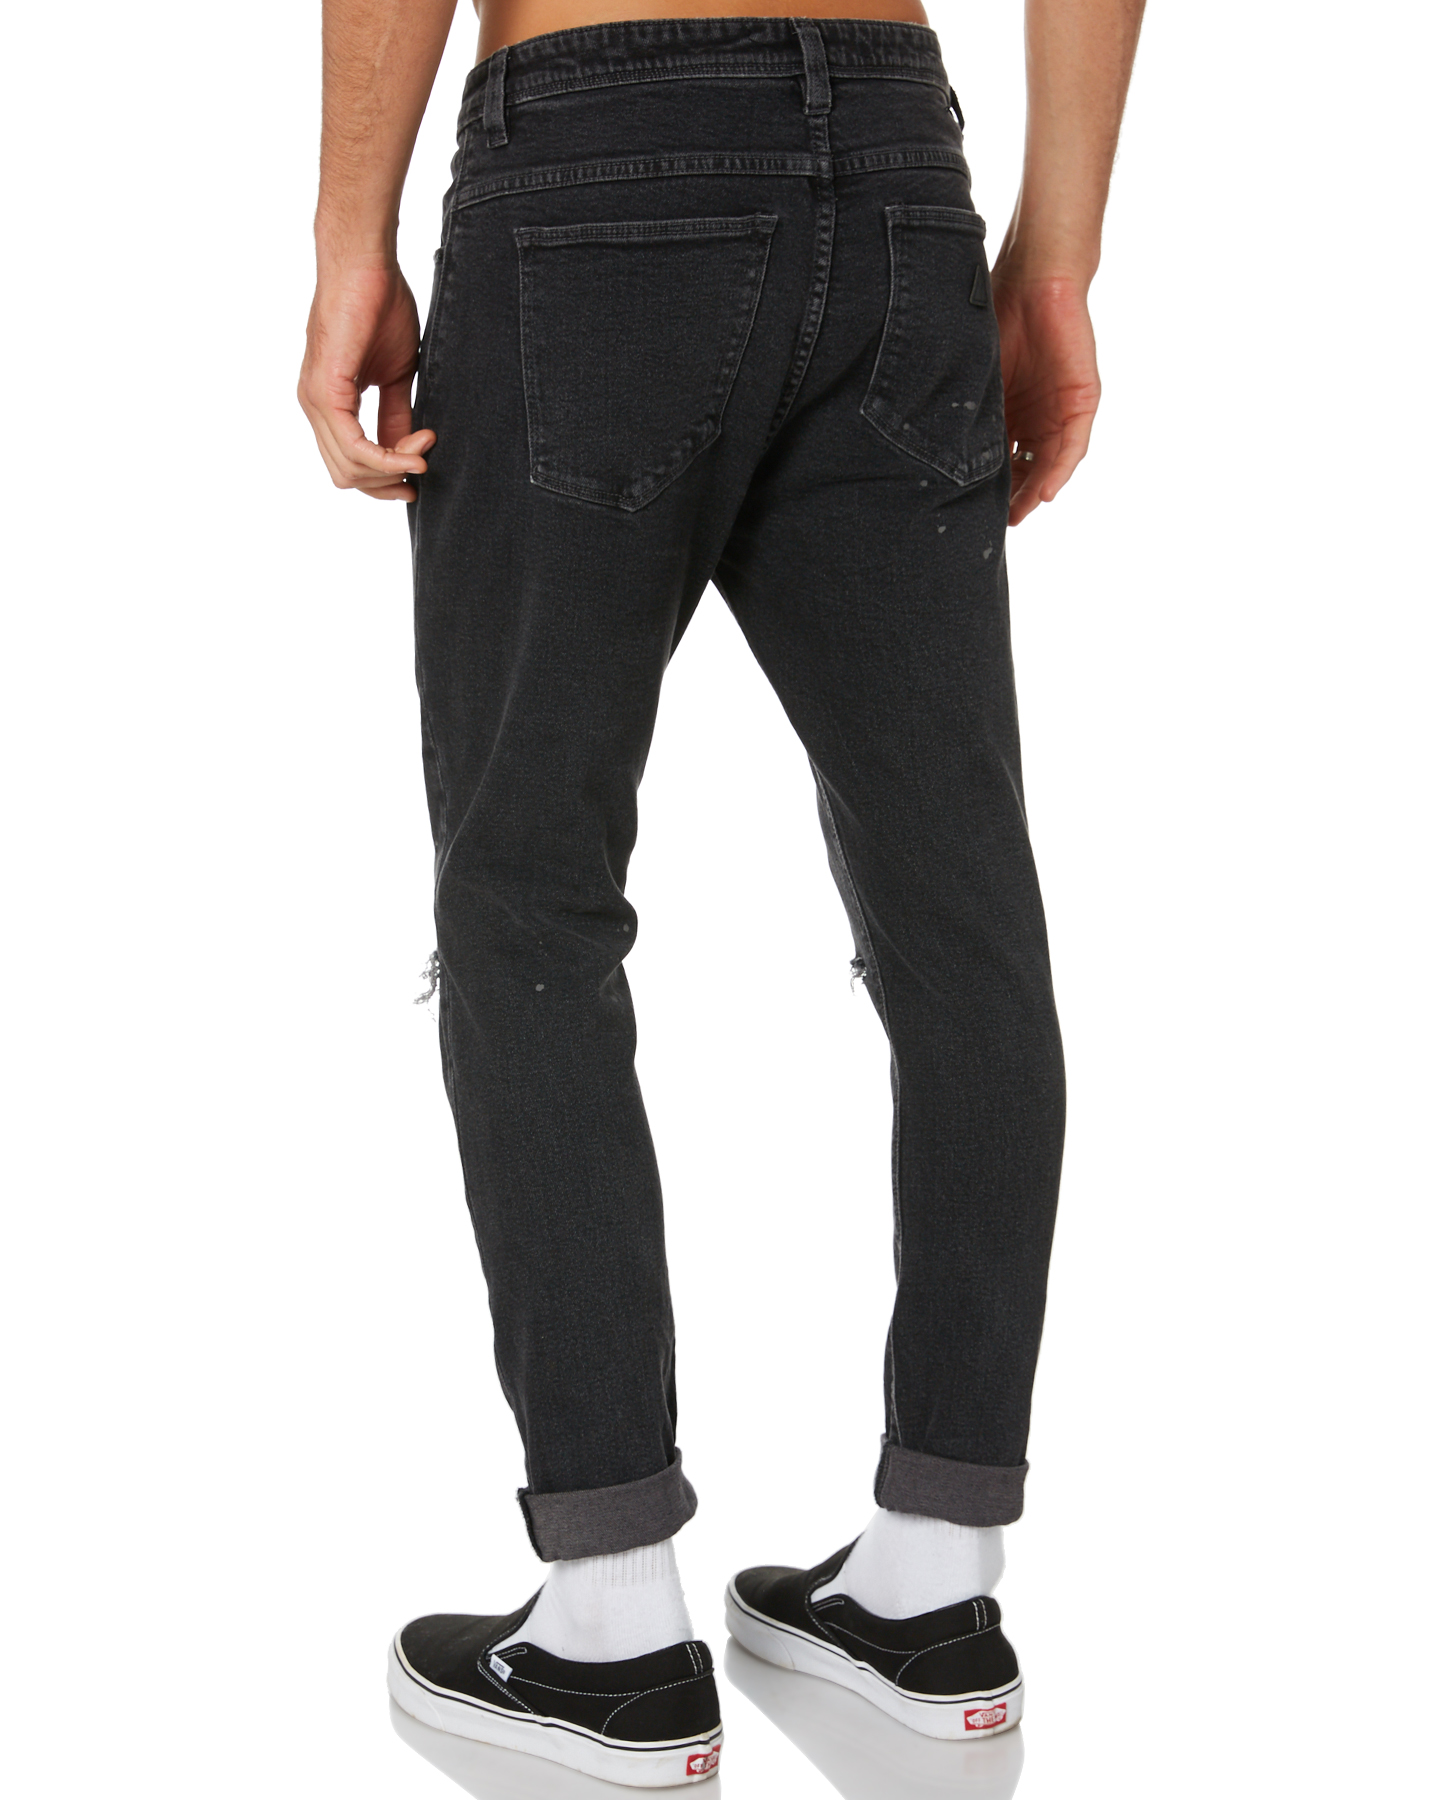 A.Brand A Dropped Skinny Turn Up Mens Jean - Ghost Black Rip | SurfStitch